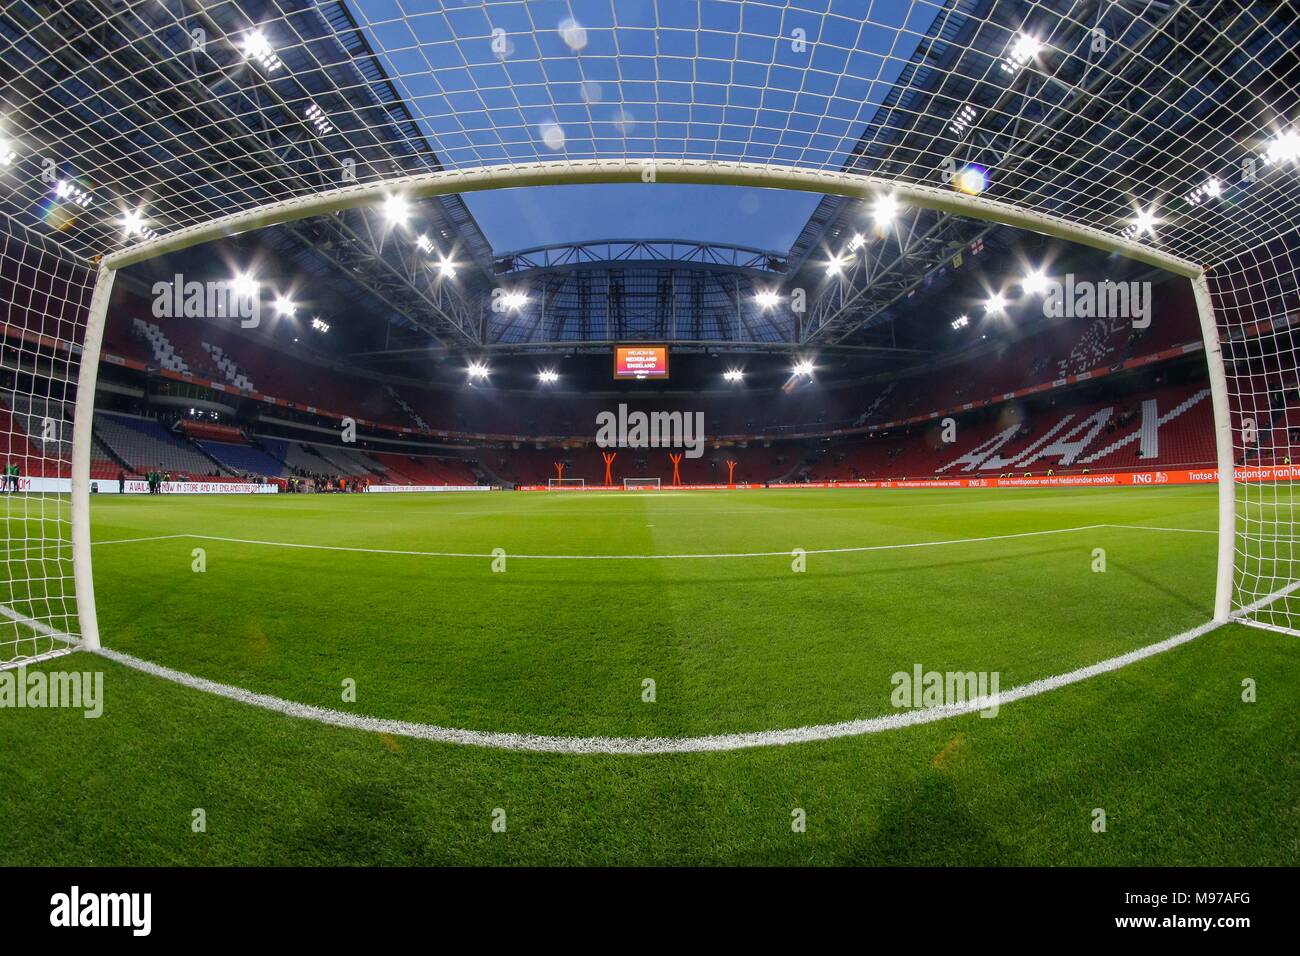 Amsterdam, Netherlands. 23rd Mar, 2018. A general view of the Johan Cruyff Arena before the friendly between Netherlands and England at the Johan Cruyff Arena on March 23rd 2018 in Amsterdam, Netherlands. (Photo by Daniel Chesterton/phcimages.com) Credit: PHC Images/Alamy Live News Stock Photo